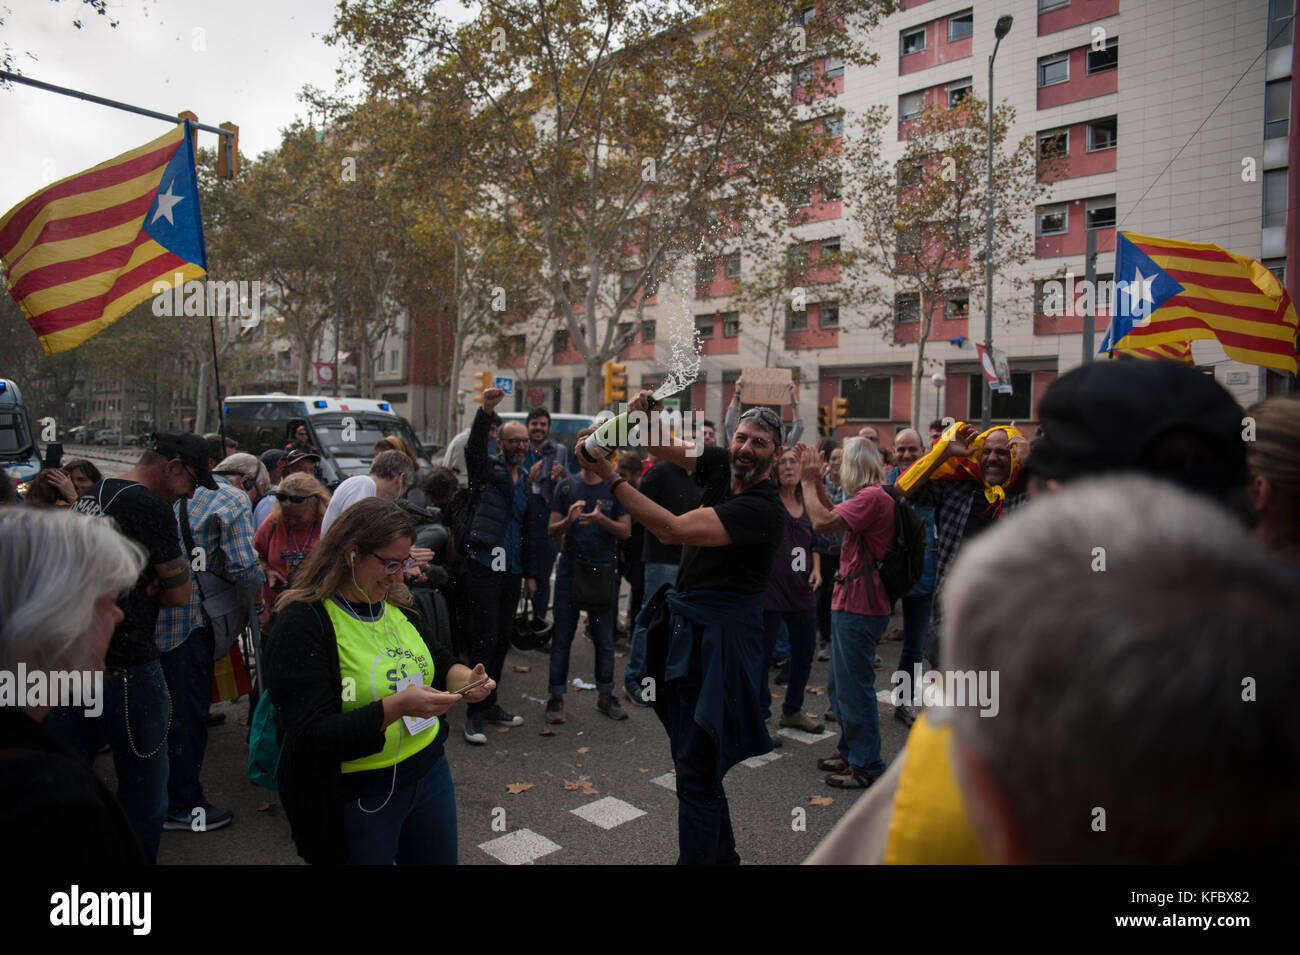 Barcelona, Spain. 27th Oct, 2017.  The people gathered at the parliament's doors uncork bottles of champagne as a sign of joy and celebrate the arrival of the Catalan republic. Credit: Charlie Perez/Alamy live News Stock Photo